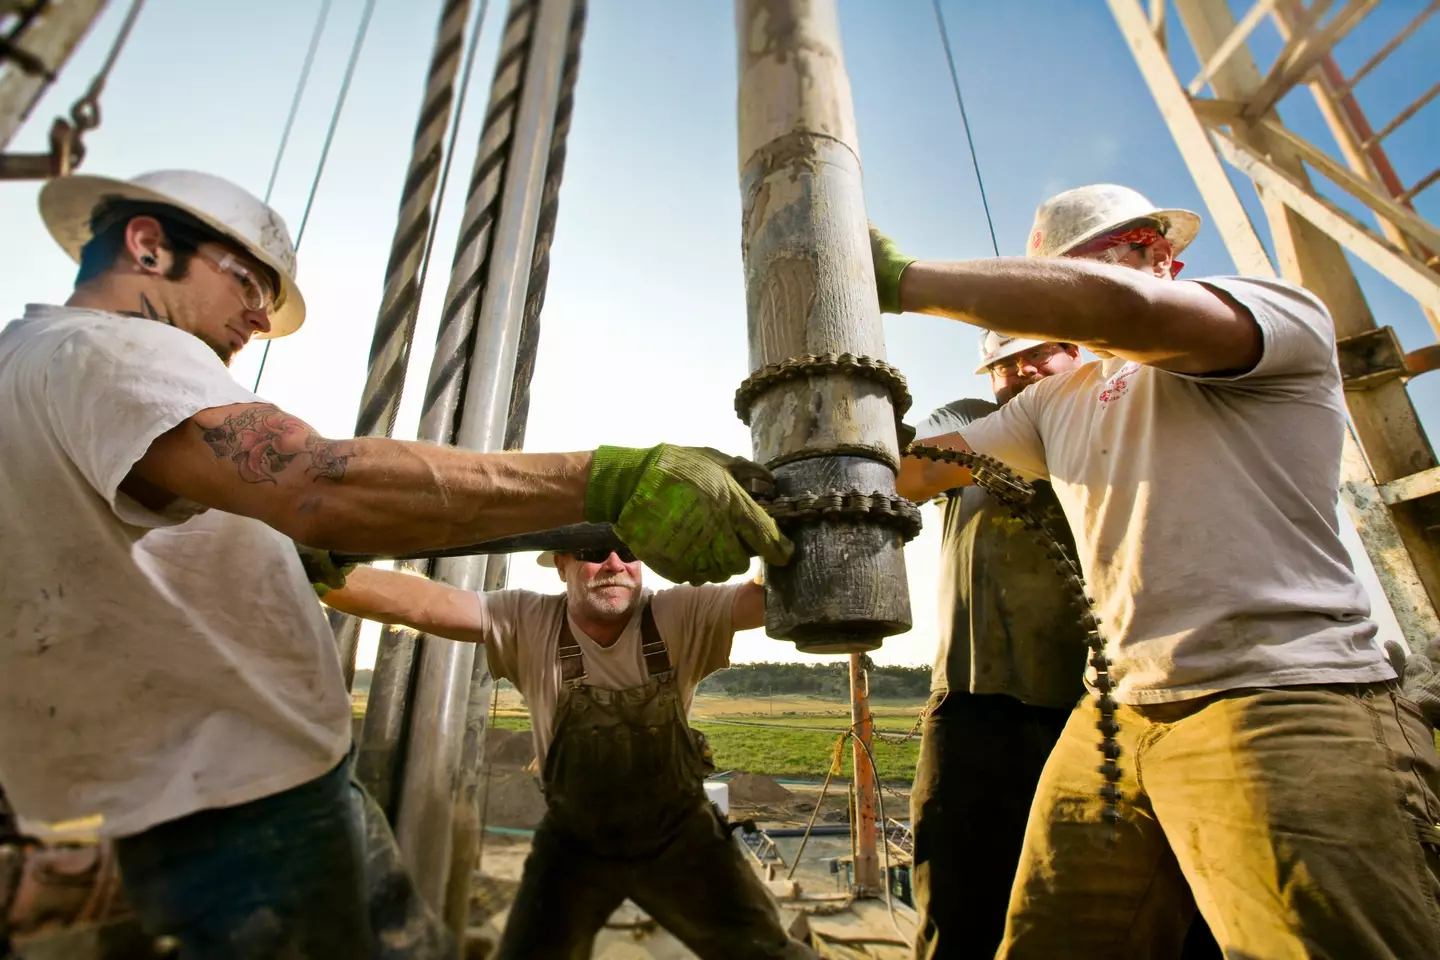 Oil rig work is labelled as one of the hardest jobs in the world.